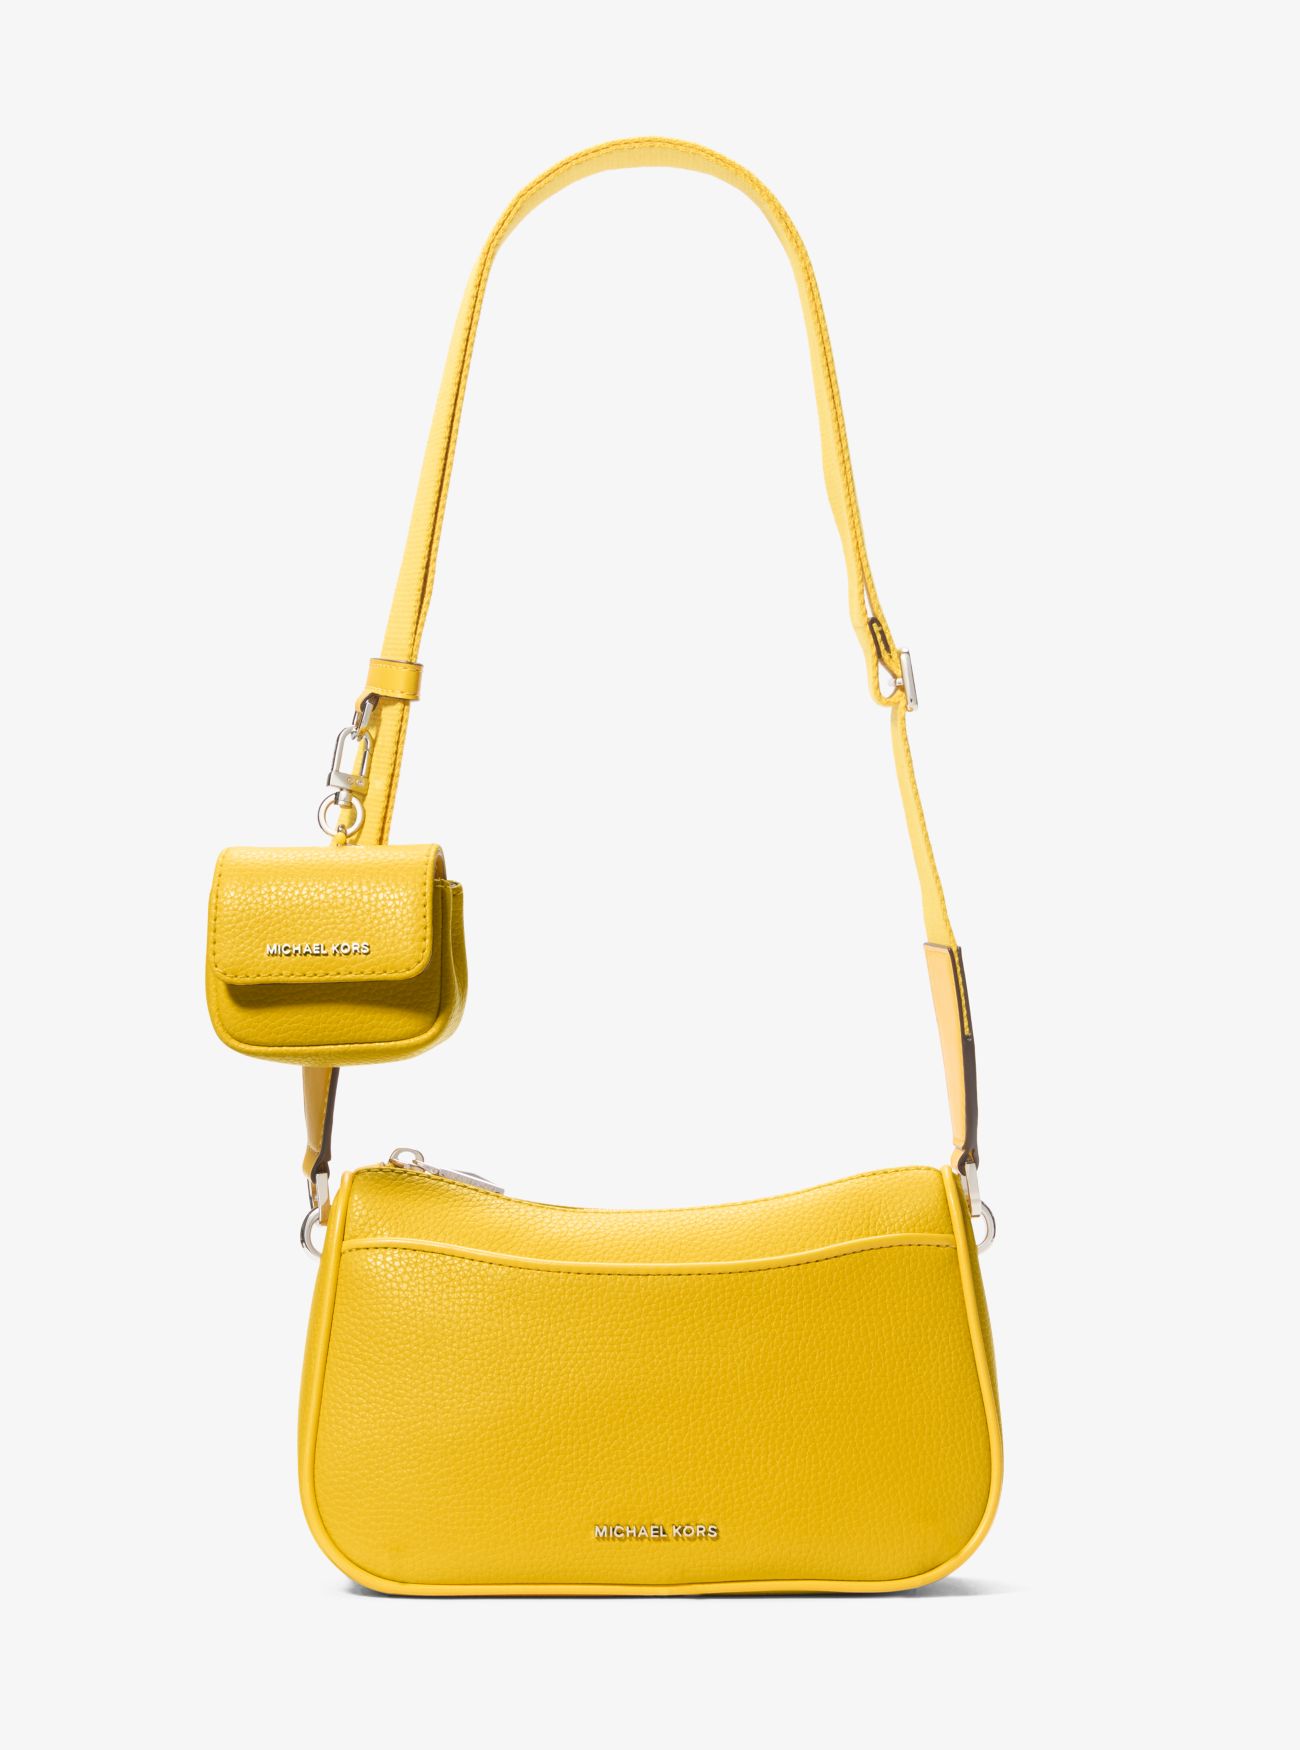 MK Jet Set Medium Pebbled Leather Crossbody Bag with Case for Apple AirPods ProÂ® - Yellow - Michael Kors